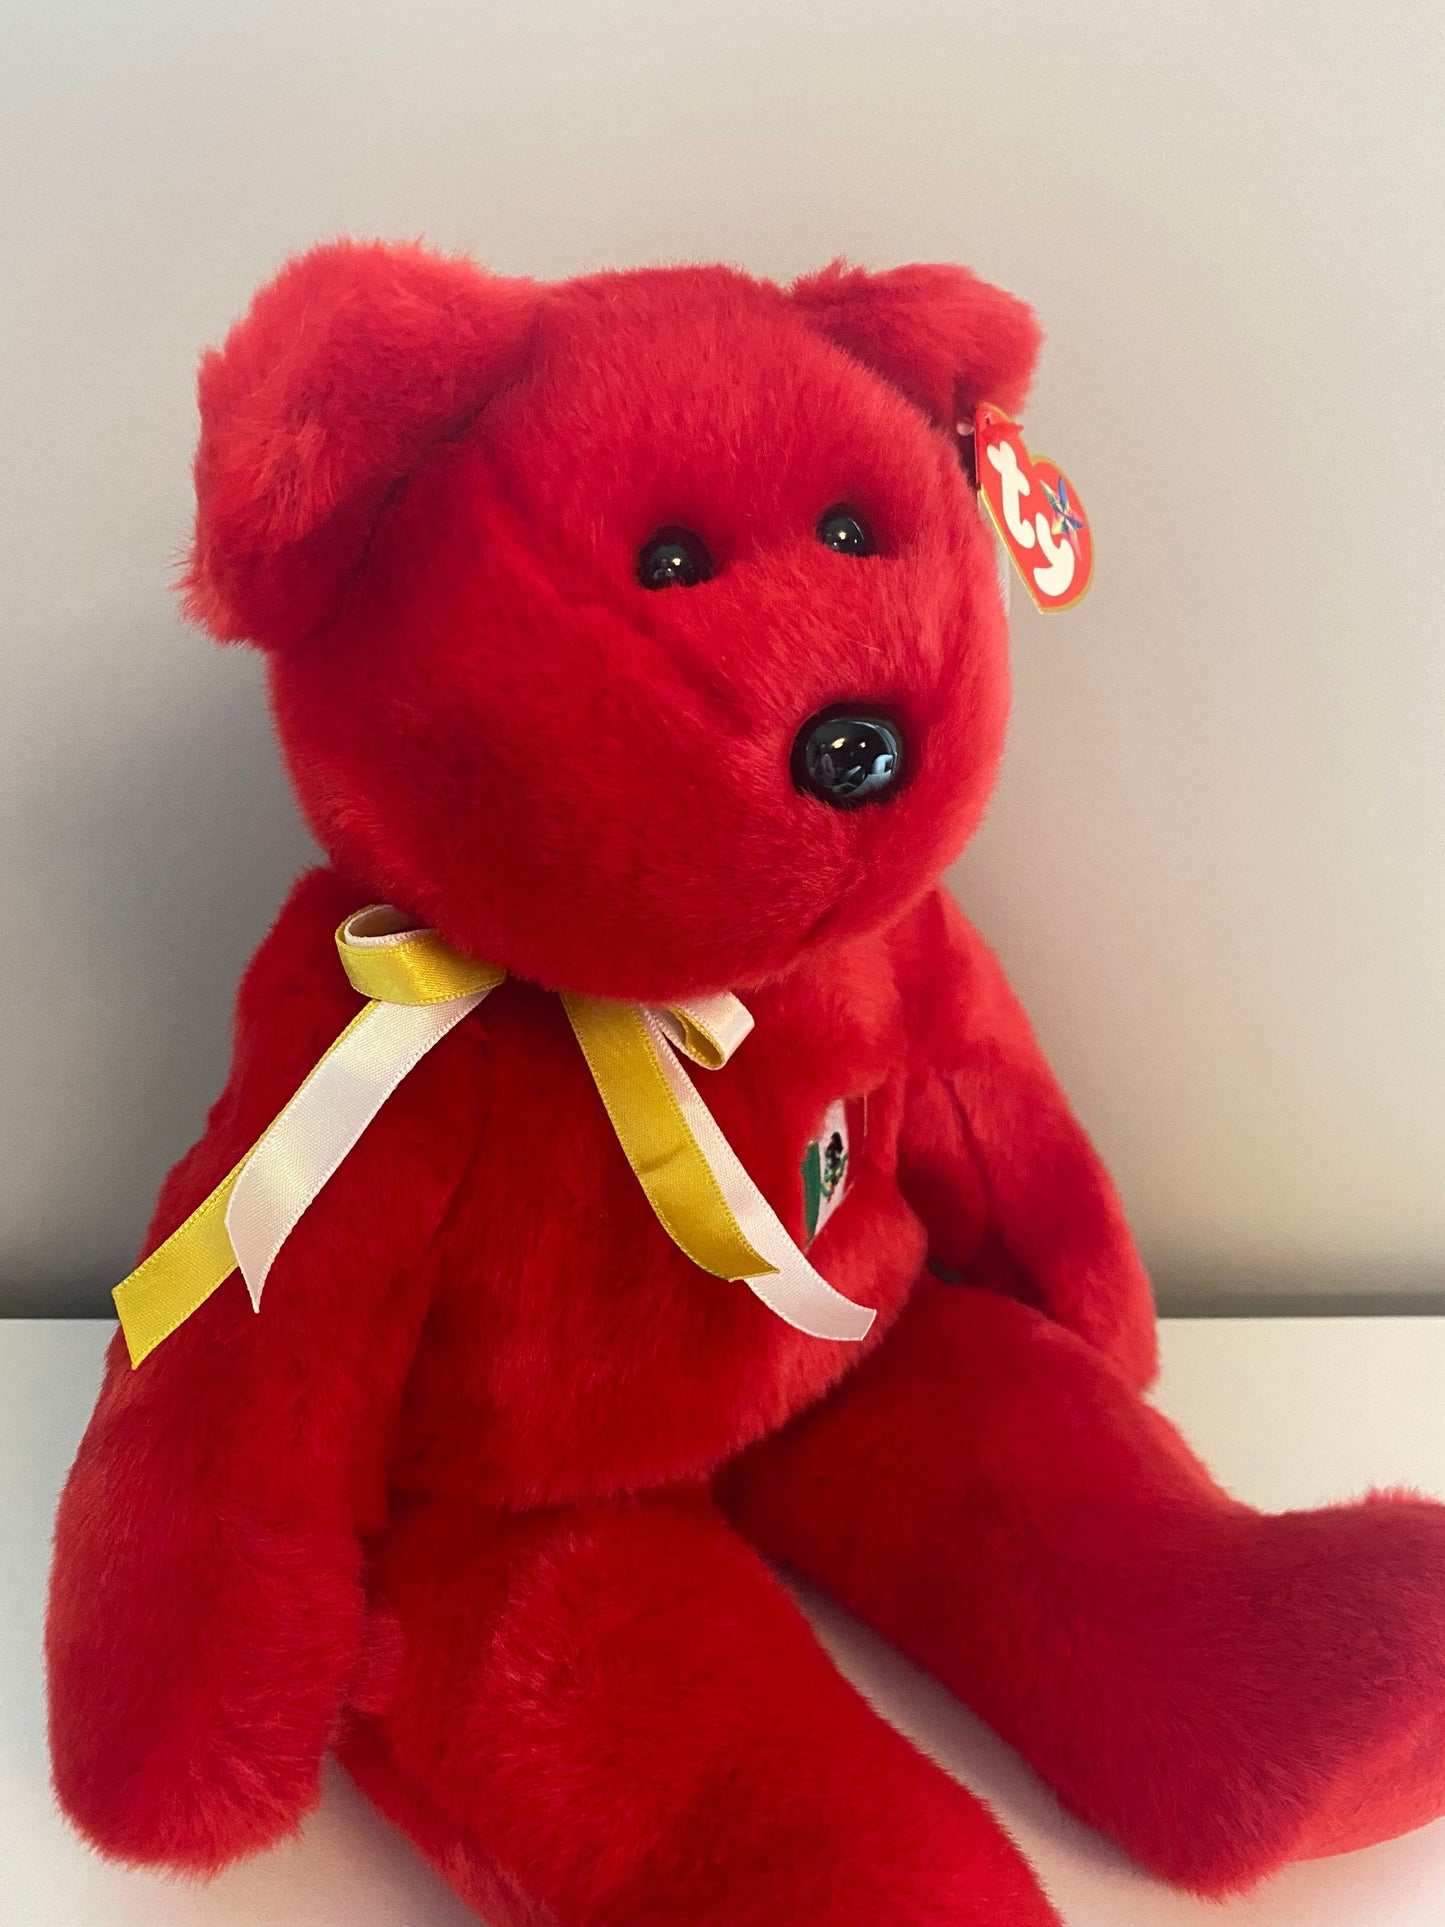 Ty Beanie Buddy “Osito” the Red Mexican Bear Plush (14 inch)